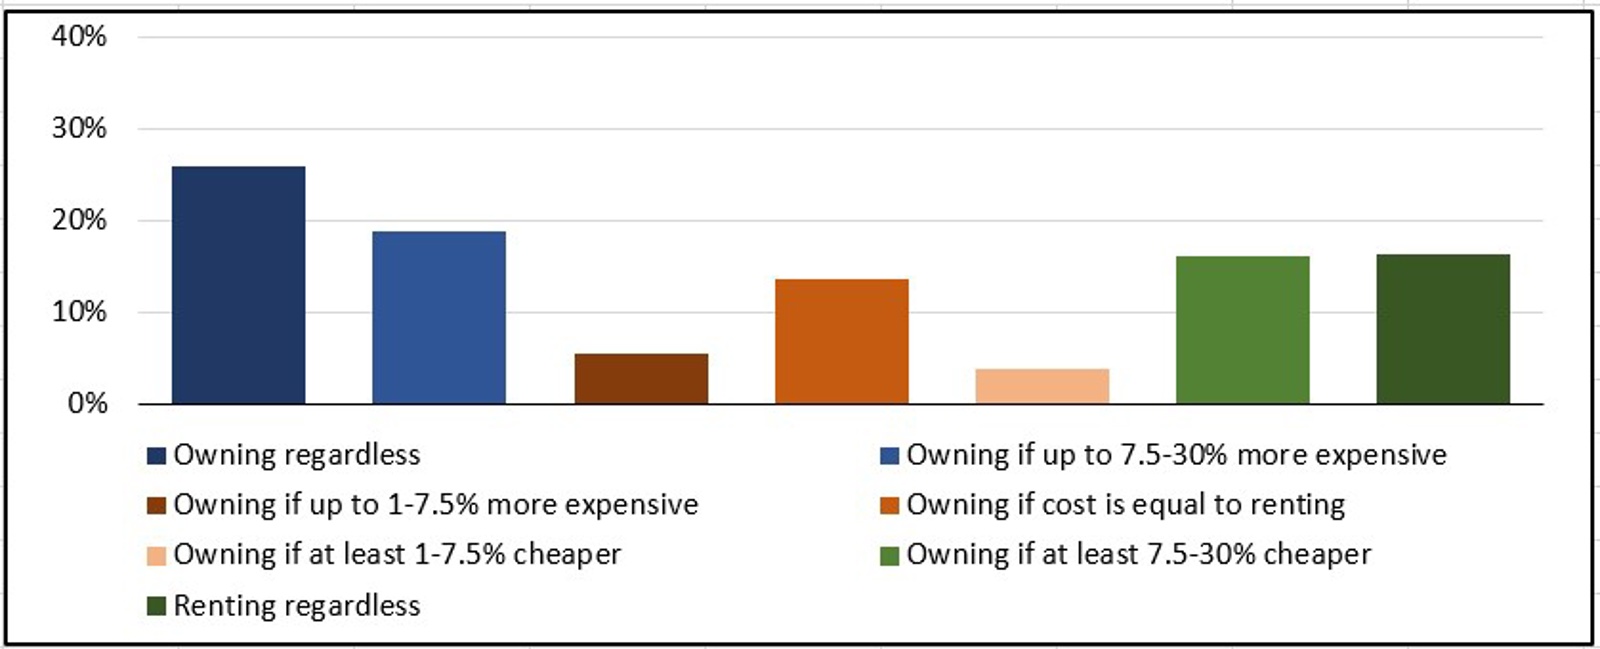 Impact of housing costs on preference for owning or renting